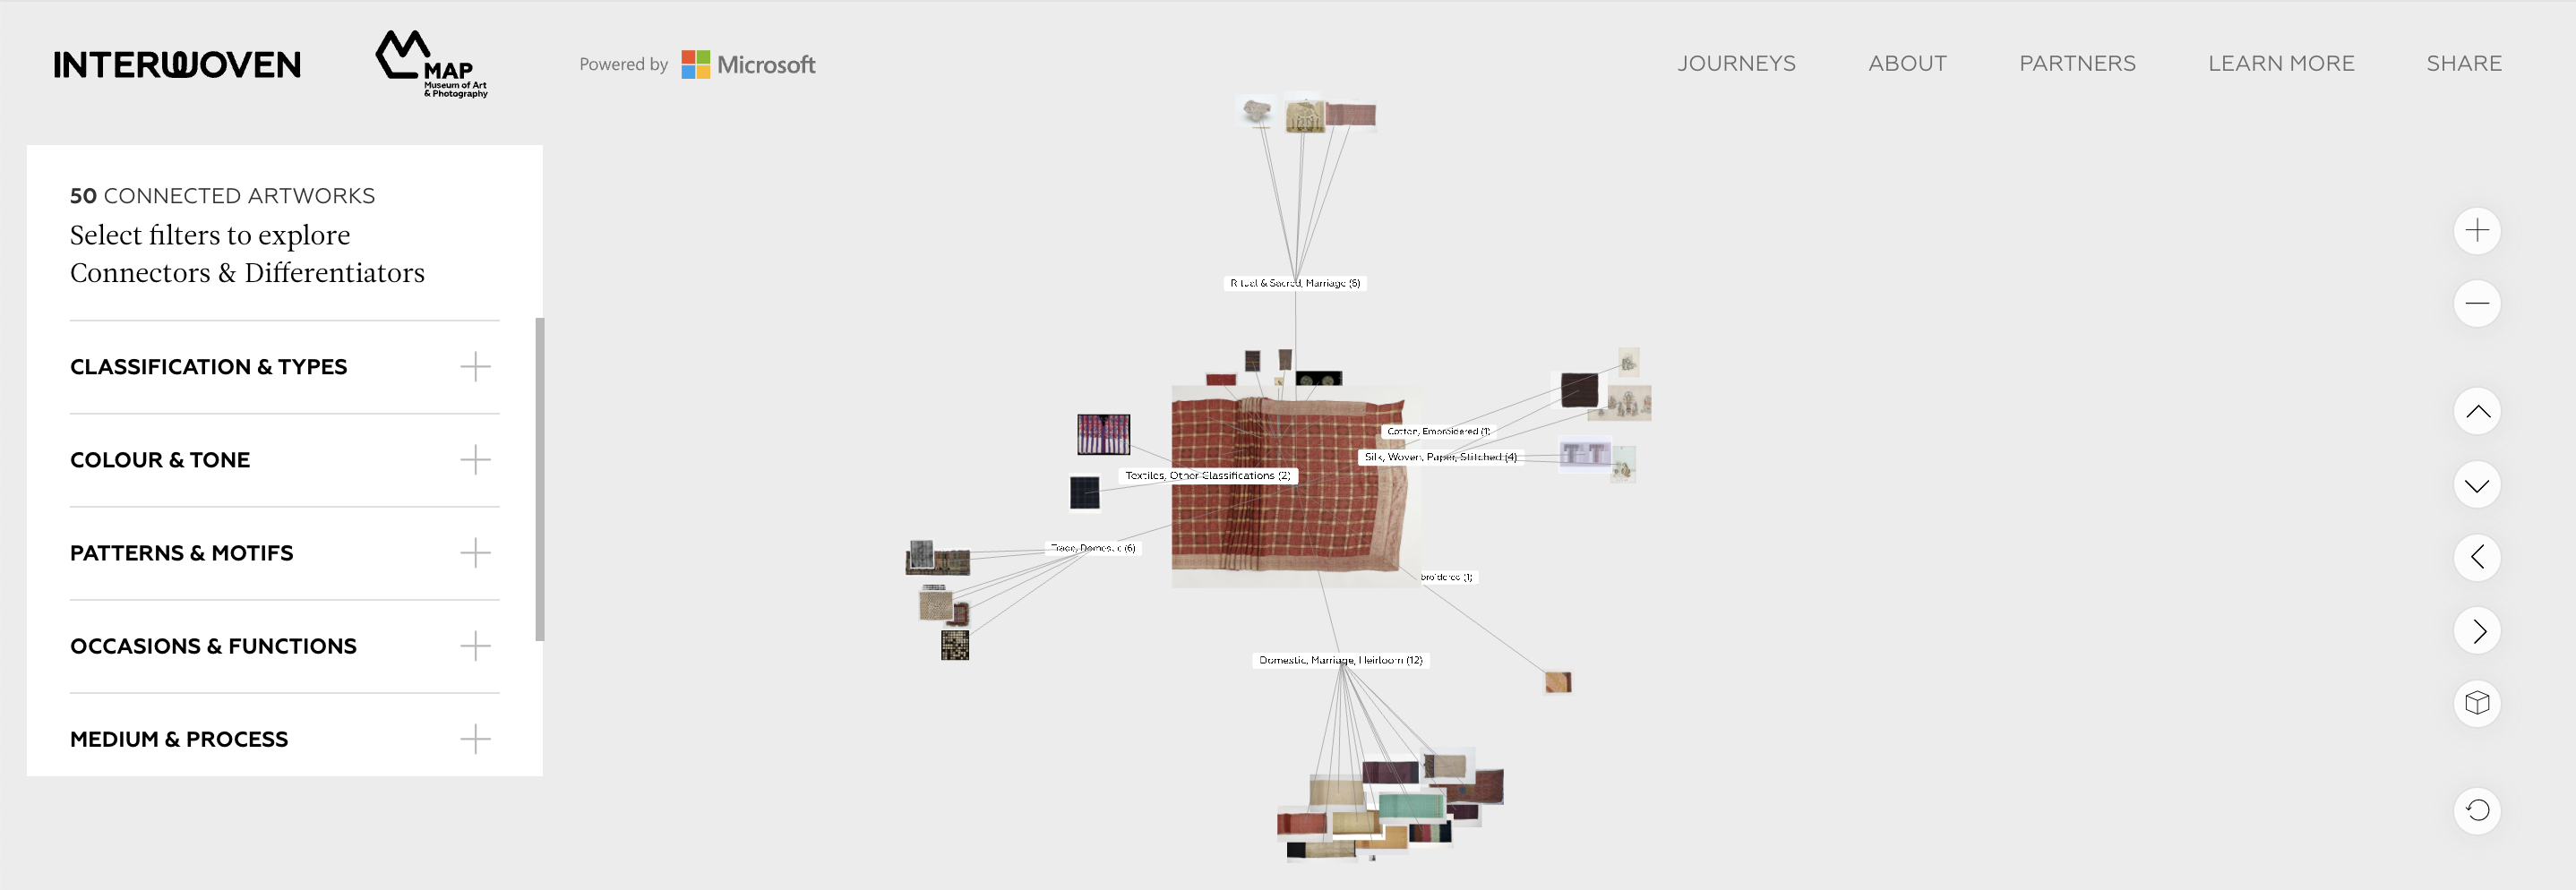 a screenshot of the Interwoven project